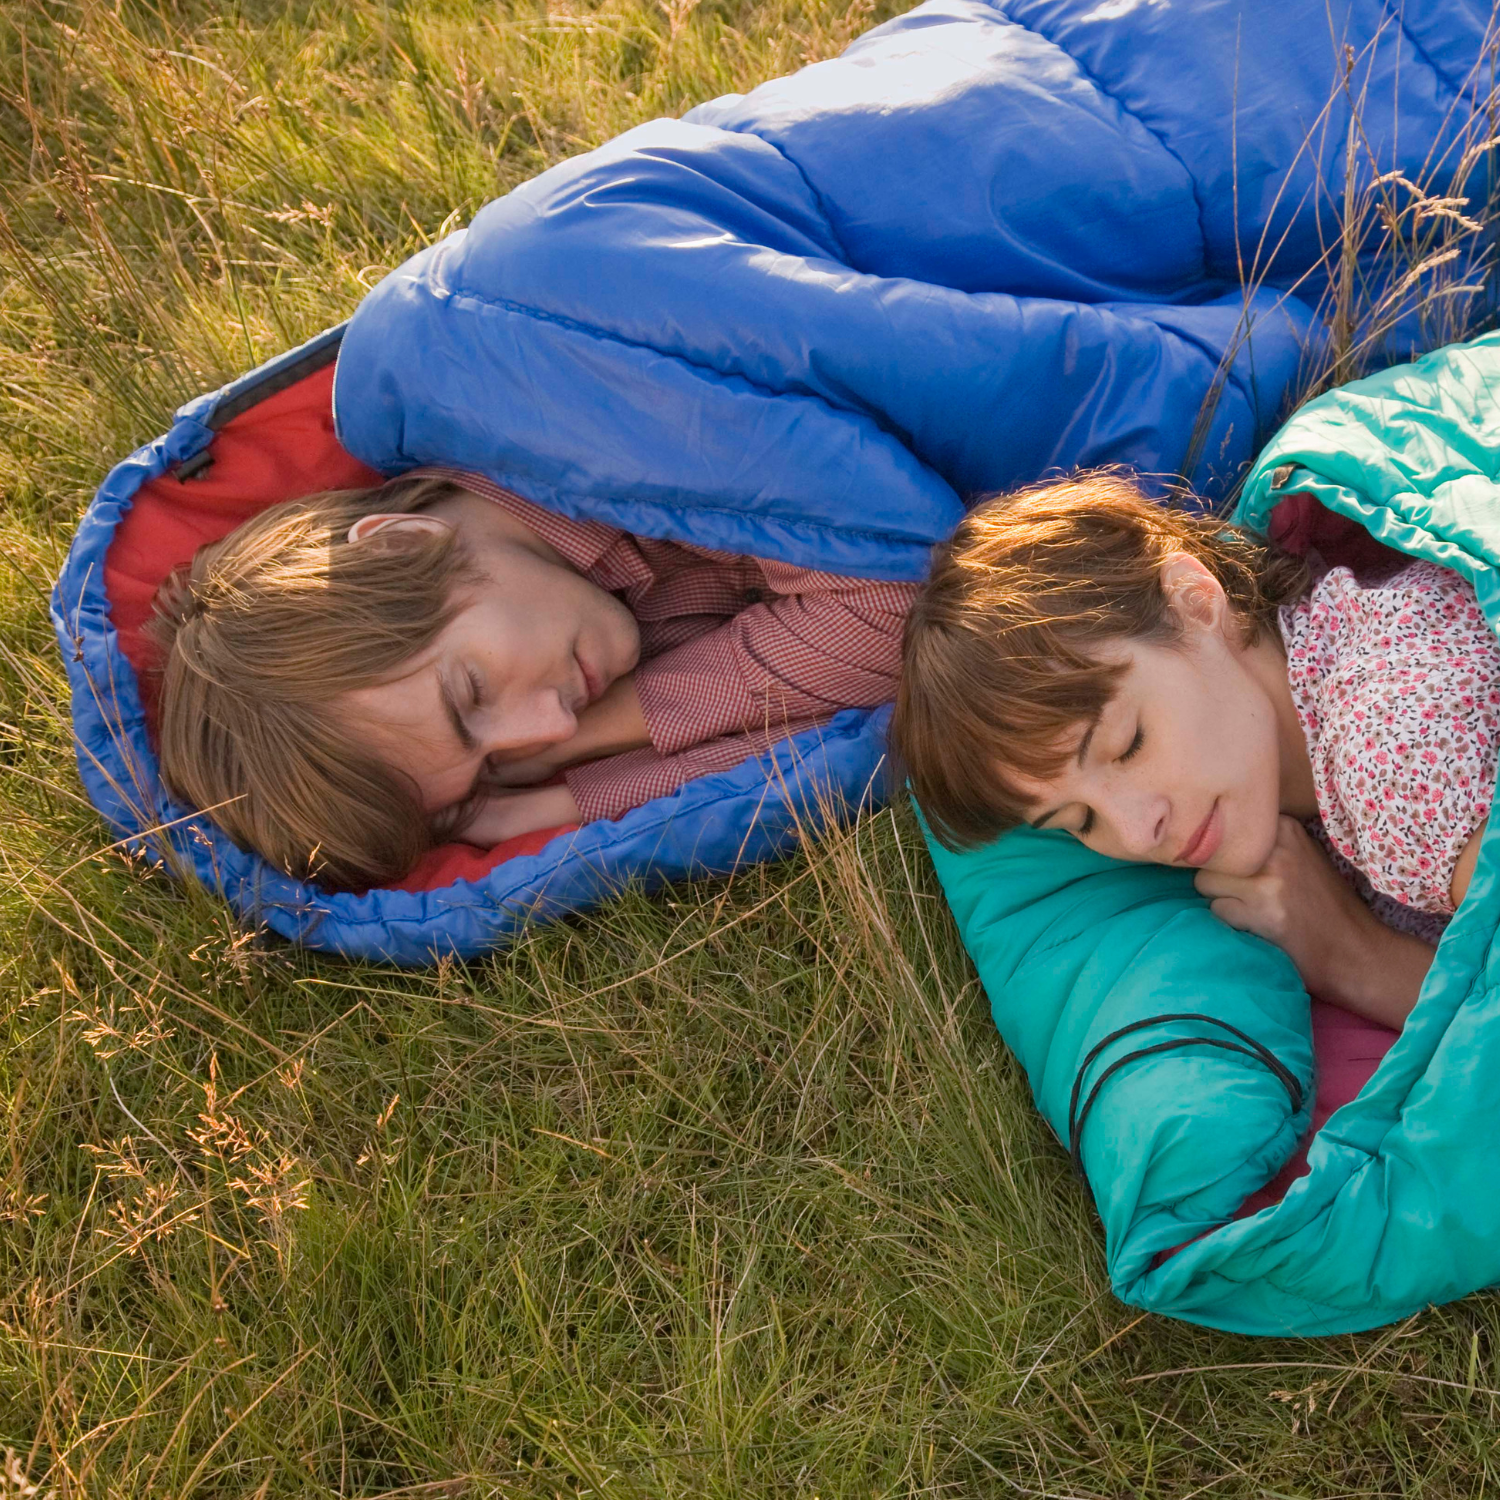 mage of a camping scene with a person sleeping on an air bed and another person sleeping in a sleeping bag on the ground.